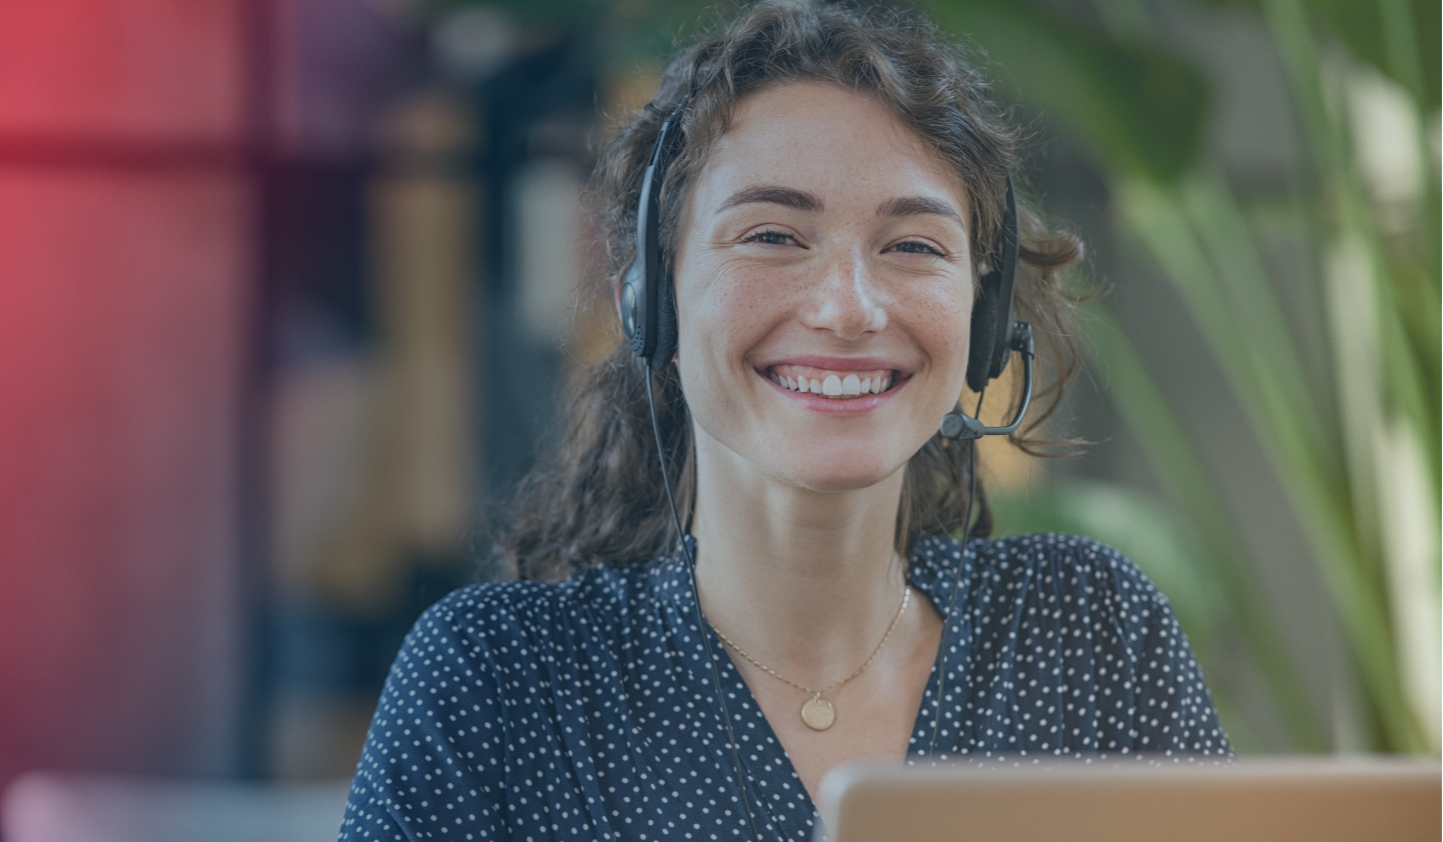 A customer service employee sits with a headset and smiles 